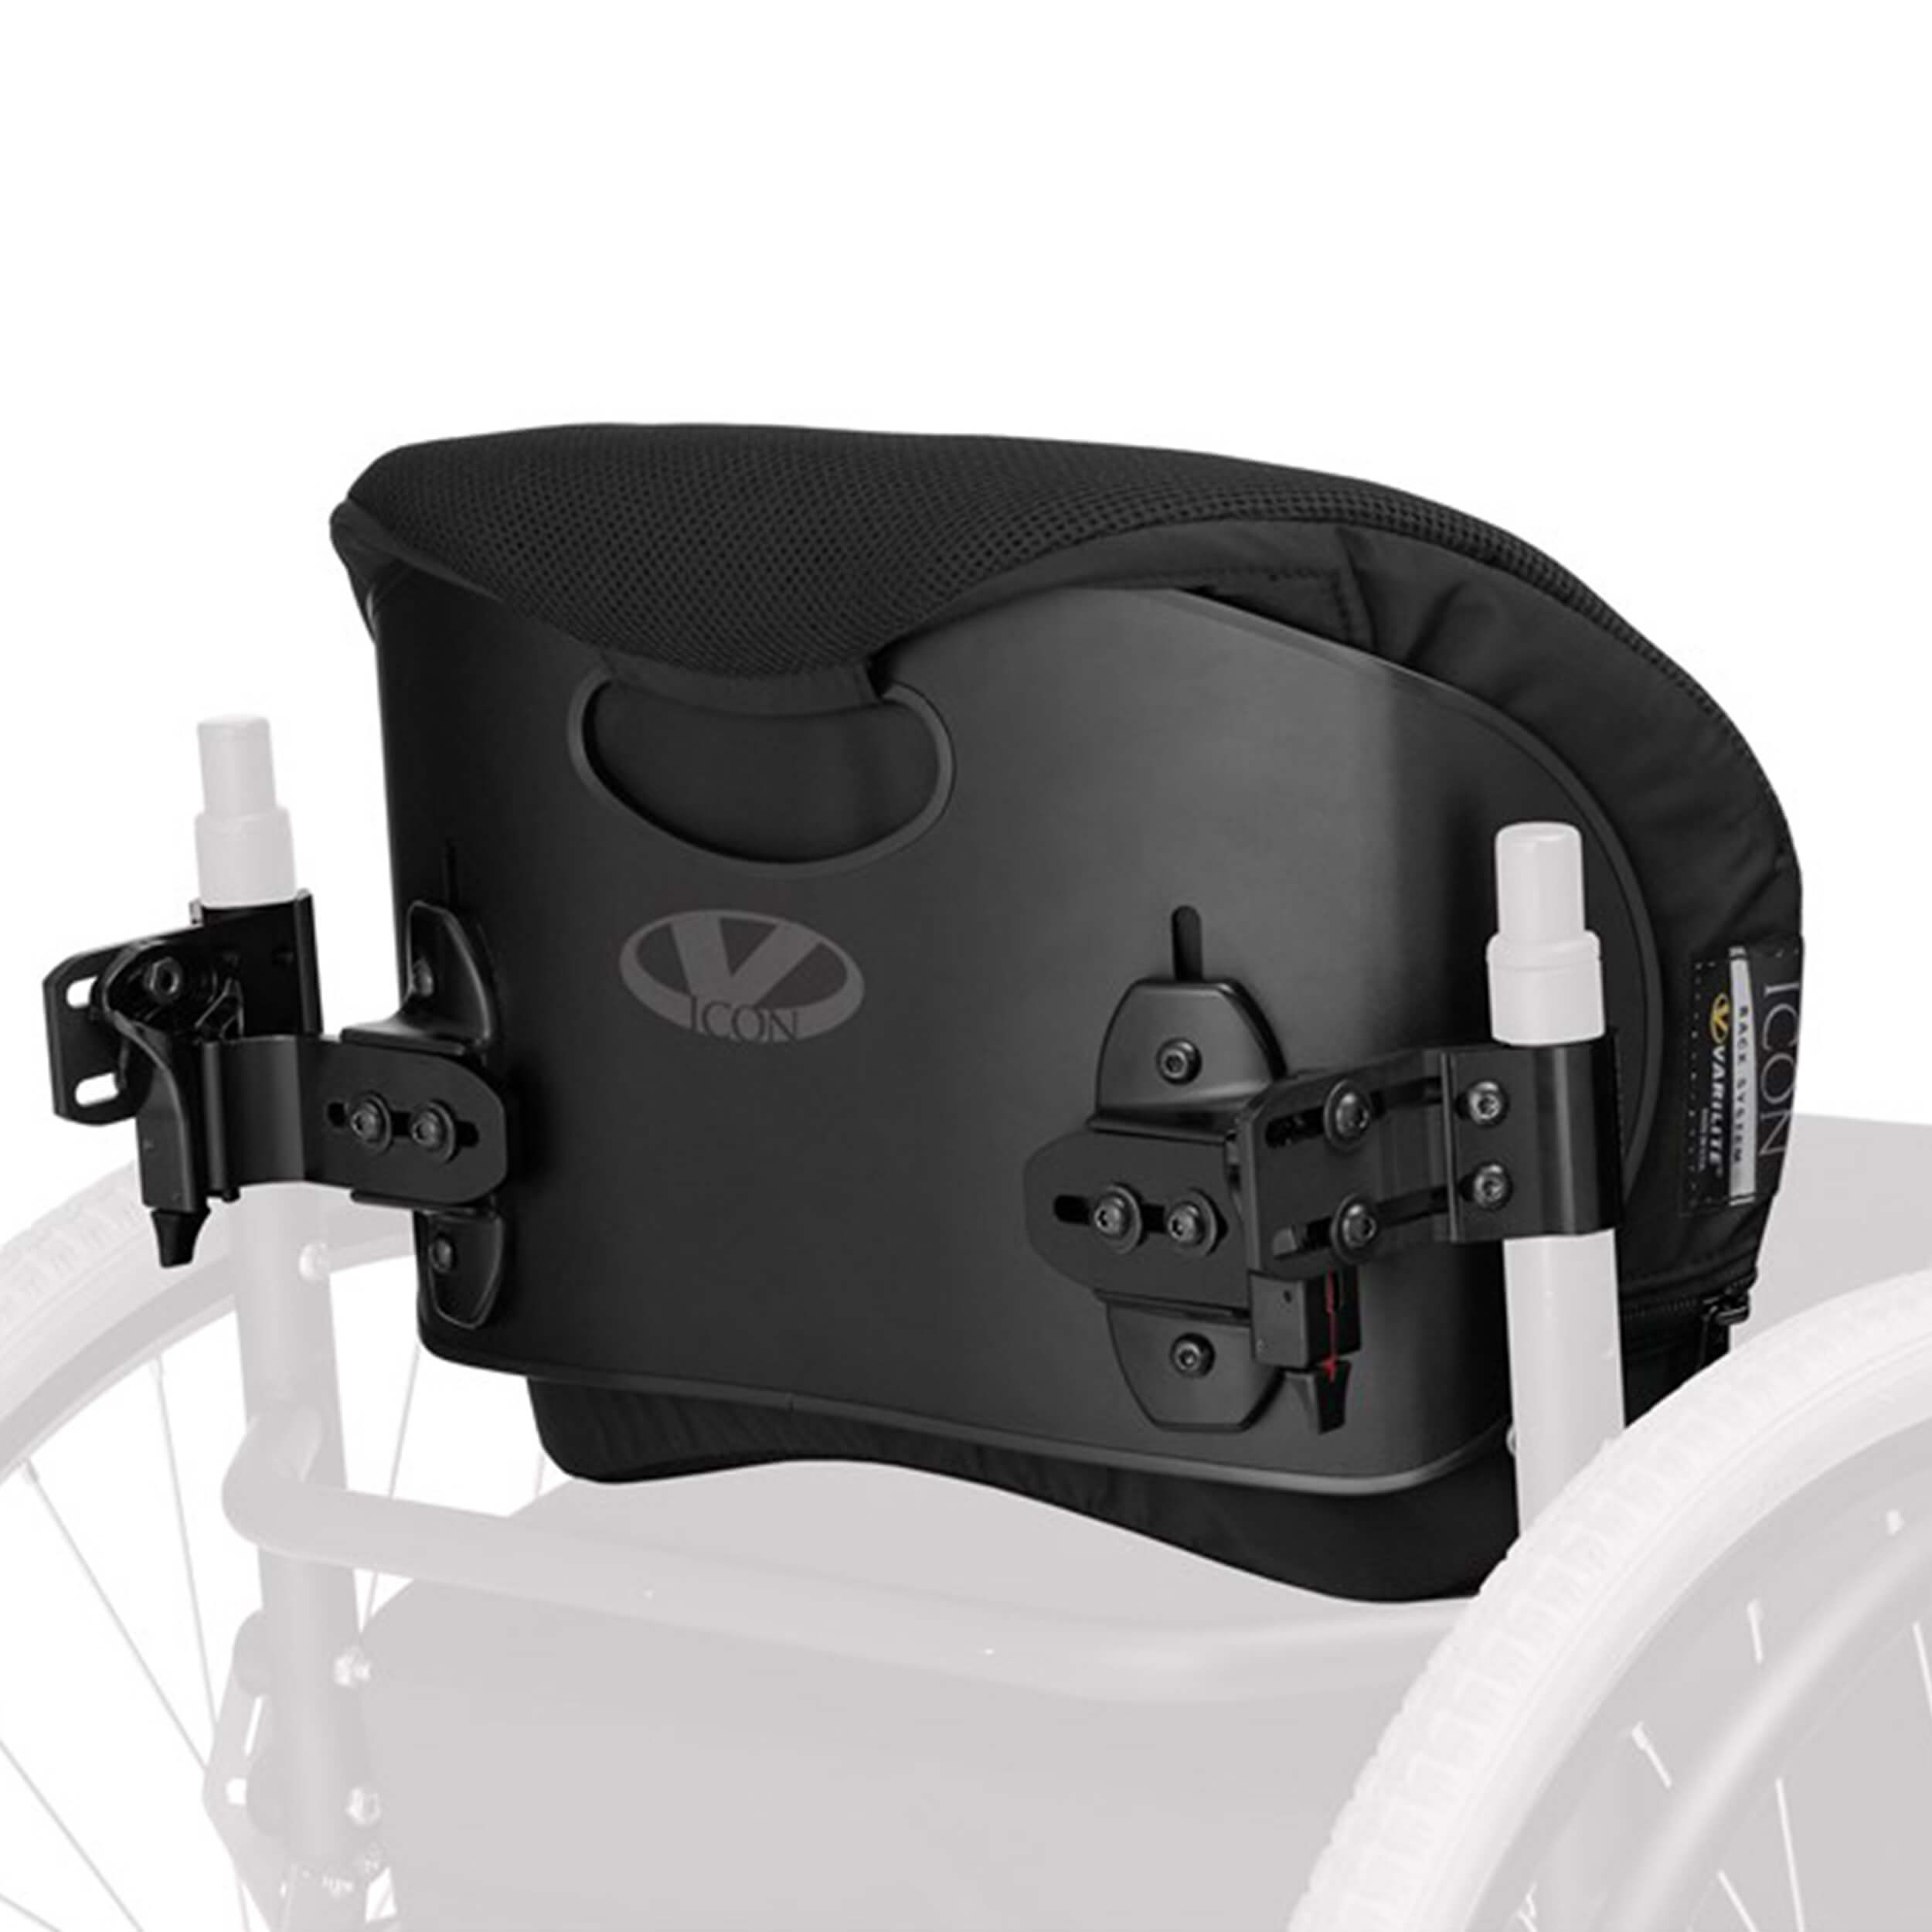 Varilite Icon Low Back Support